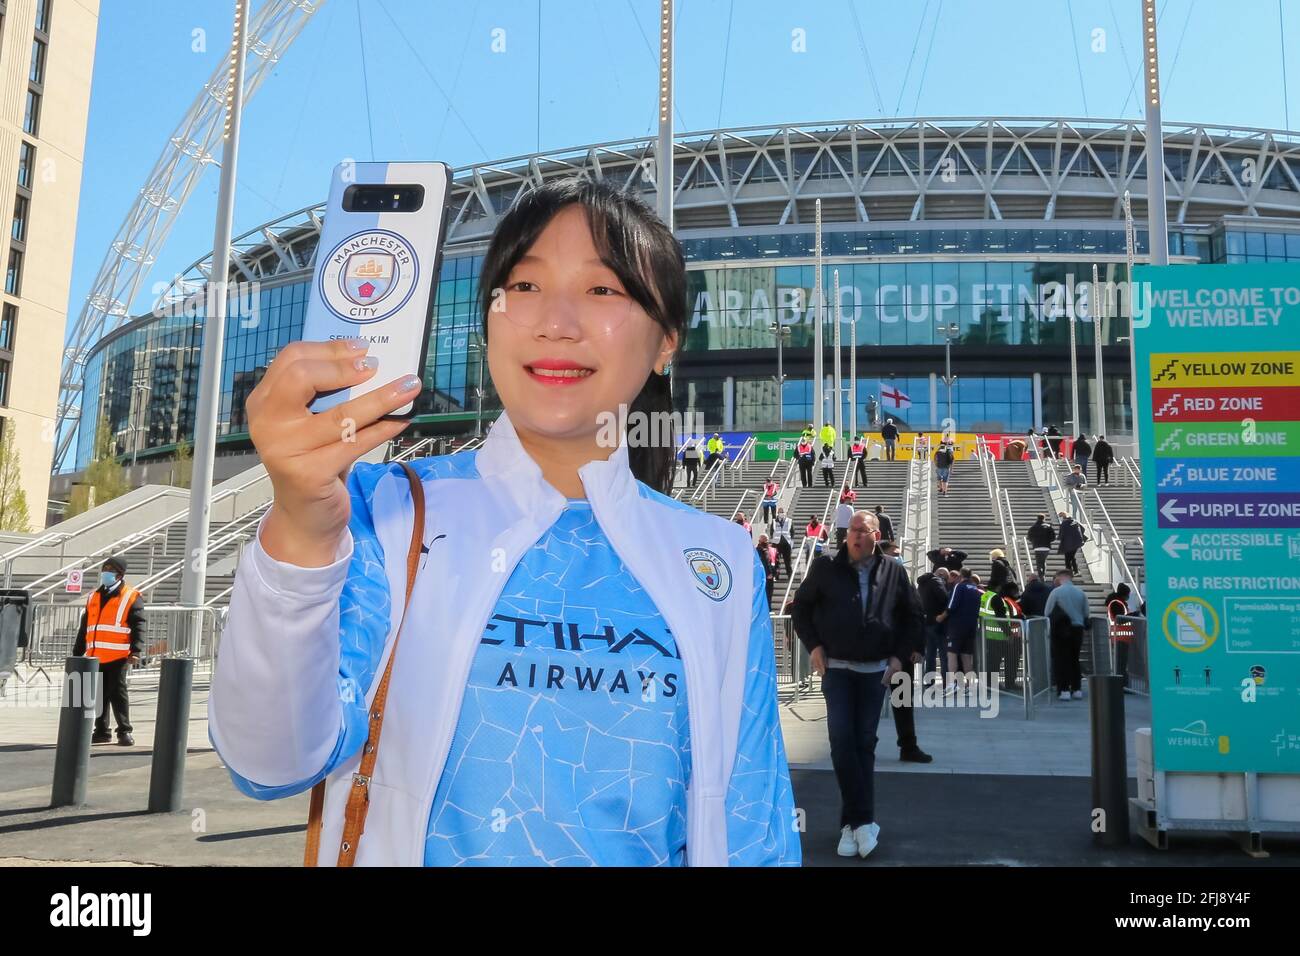 Wembley Stadium, Wembley Park, UK. 25th April 2021.Manchester City fans outside Wembley Stadium ahead of the Carabao Cup Final match between Manchester City and Tottenham Hoptspur.  8,000 local residents, NHS Staff and fans are expected to attend the match, the largest number of spectators attending a sporting event in a UK stadium for over a year.  Covid-19 Lateral Flow testing will take before and after the match and data gathered will be used to plan how all events can take place following lockdown. Amanda Rose/Alamy Live News Stock Photo